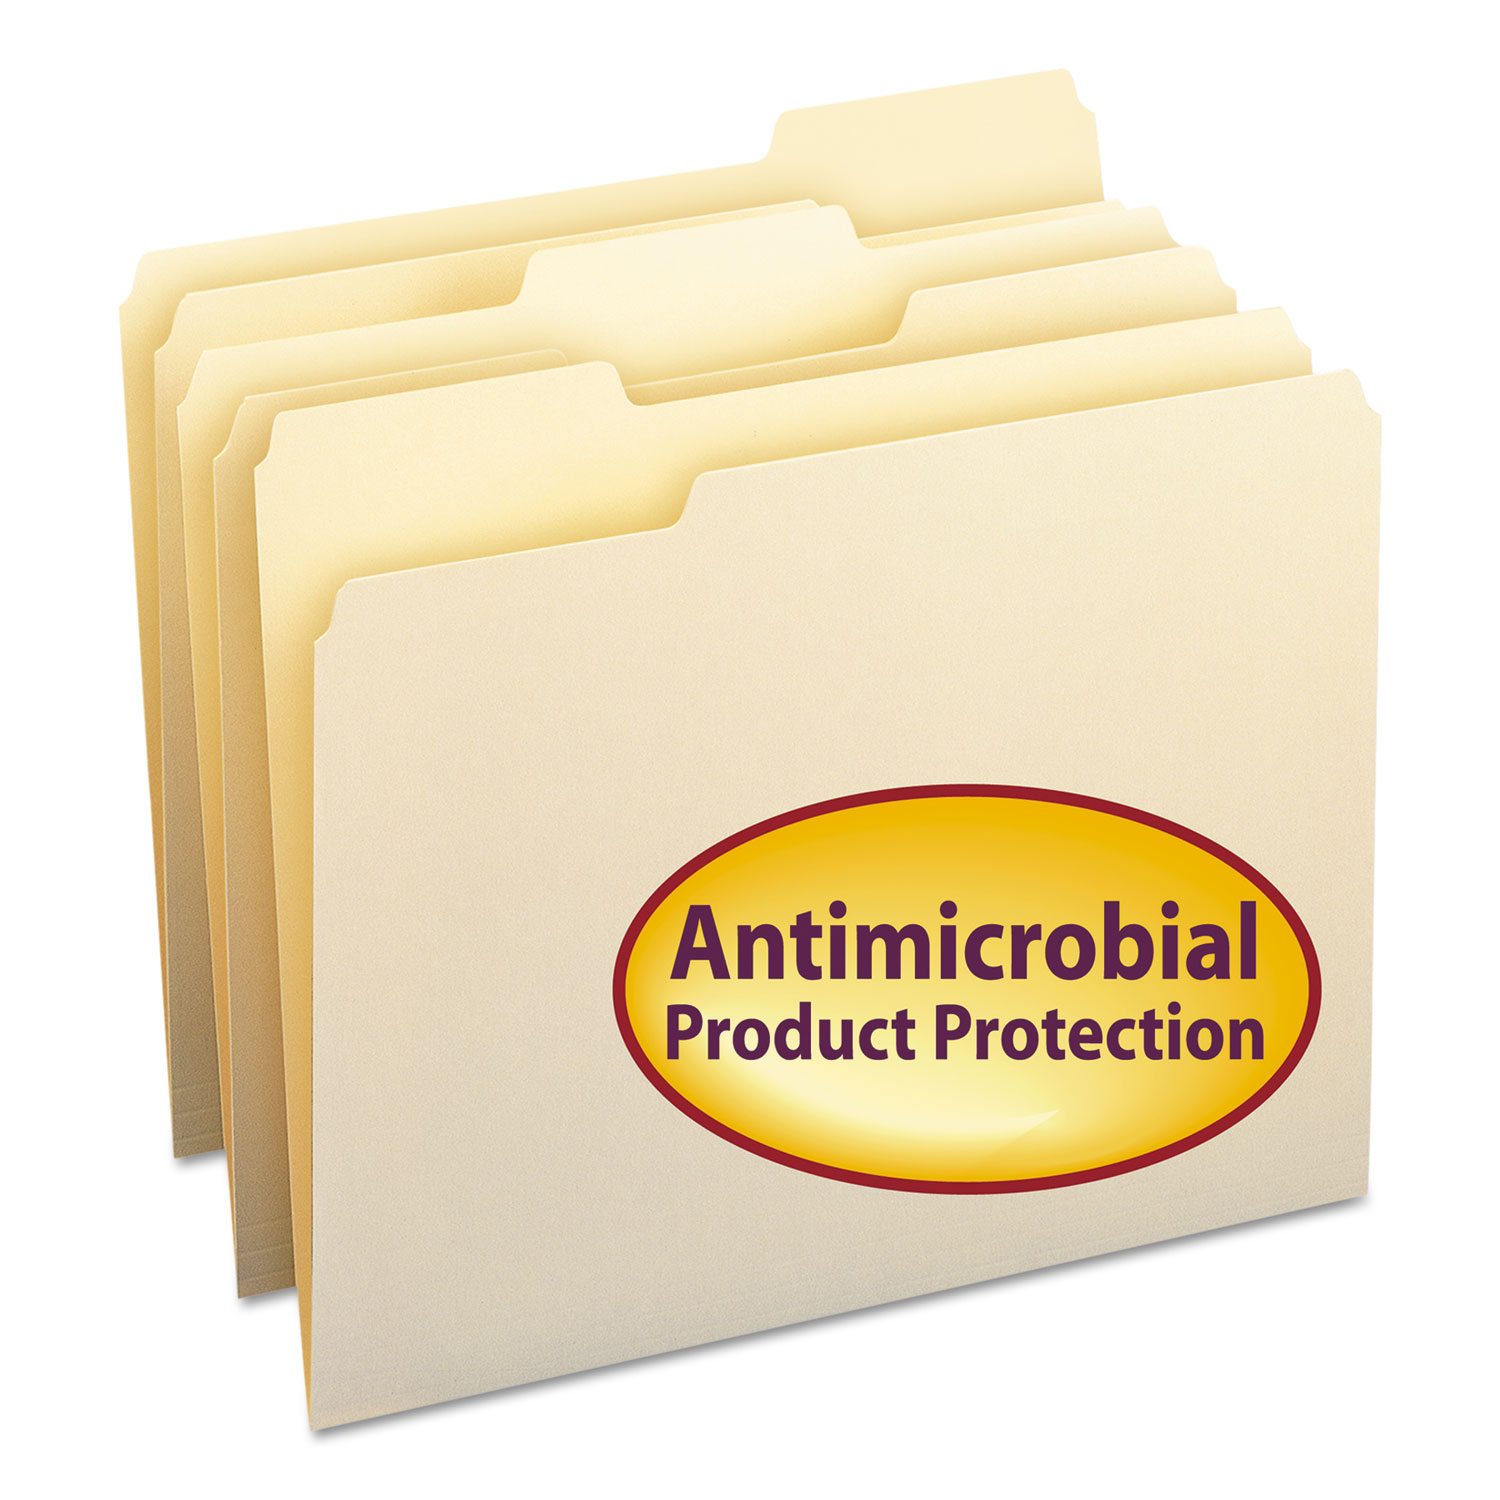  Smead 10338 Top Tab File Folders with Antimicrobial Product Protection, 1/3-Cut Tabs, Letter Size, Manila, 100/Box (SMD10338) 